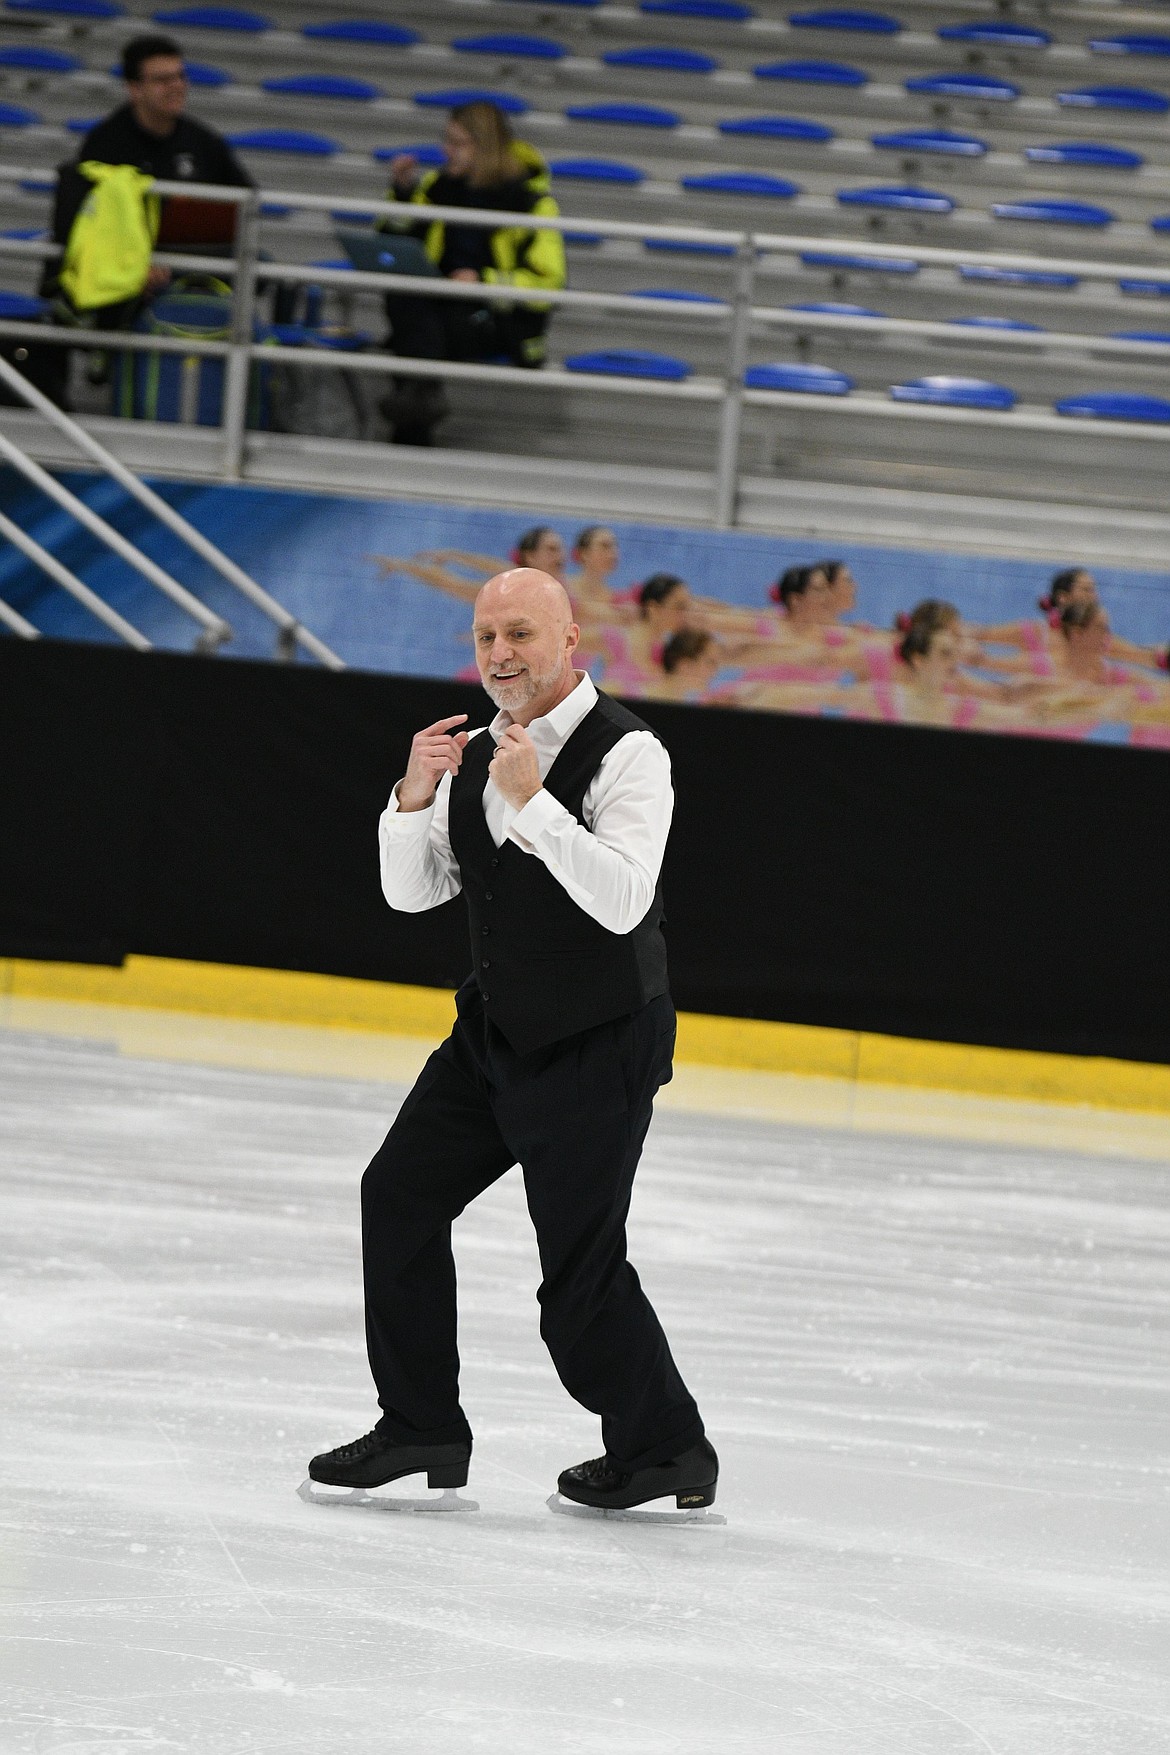 Photo by KrPhotogs Photography LLC
Dean Wiles reacts after landing a jump during the Adult Figure Skating Championship on April 9 in Newark, Del.